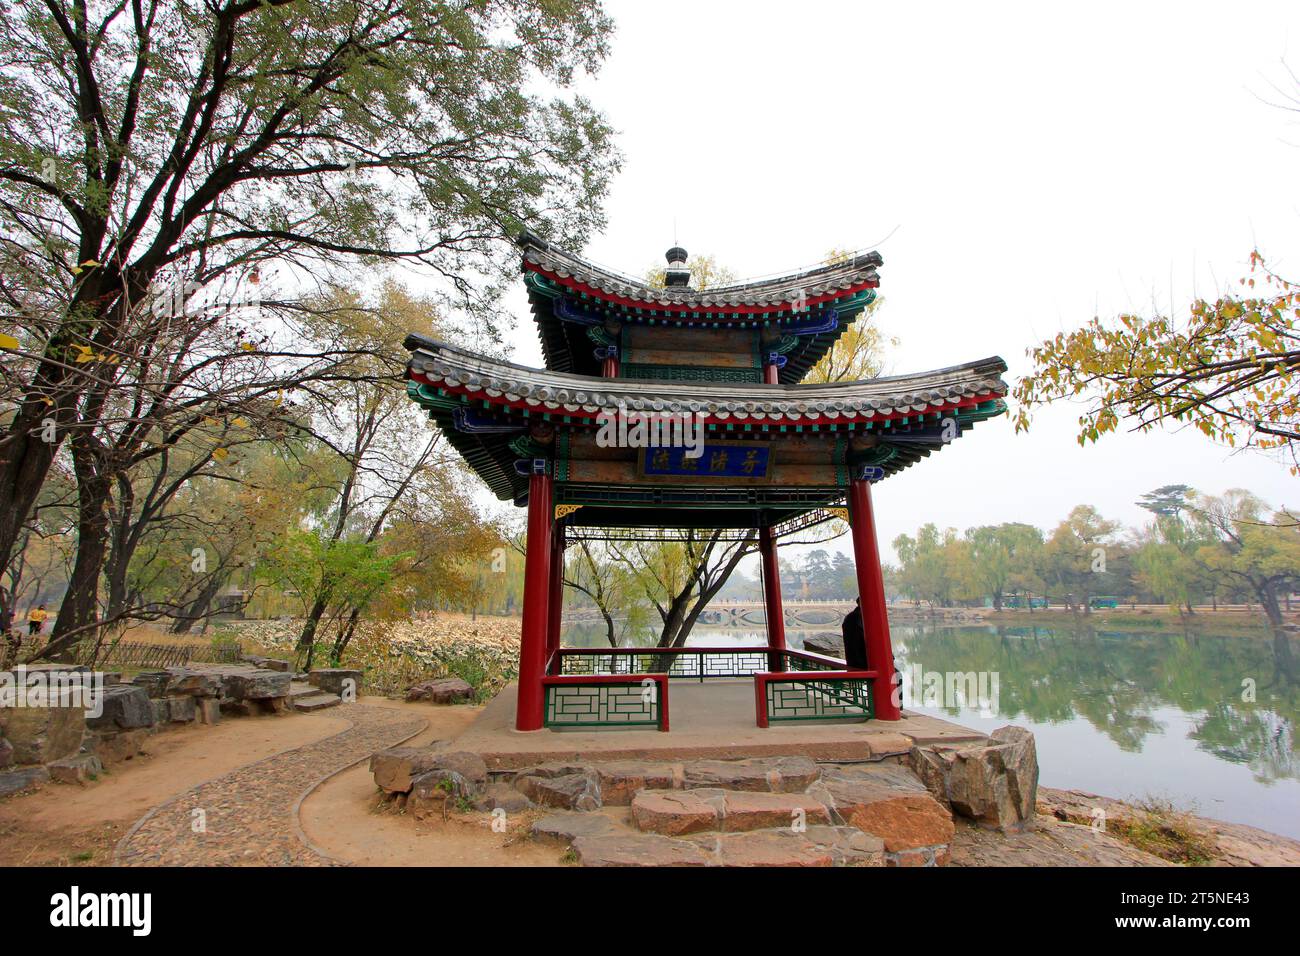 CHENGDE CITY -  OCTOBER 20: Traditional Chinese style pavilion in chengde mountain resort, on october 20, 2014, Chengde City, Hebei Province, China Stock Photo